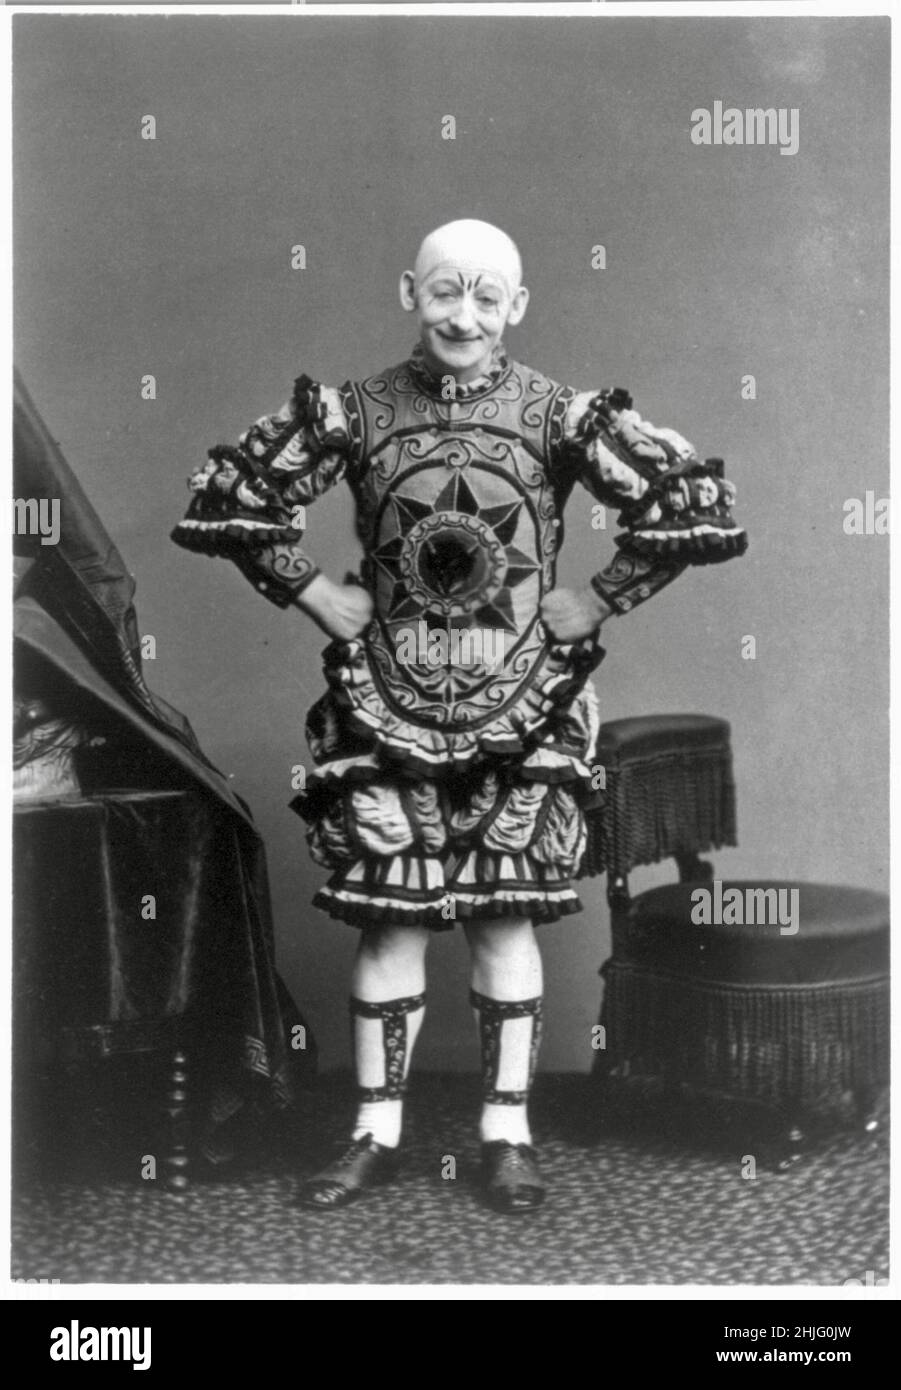 George L Fox as Humpty Dumpty in the 1868 Broadway pantomime production. Stock Photo